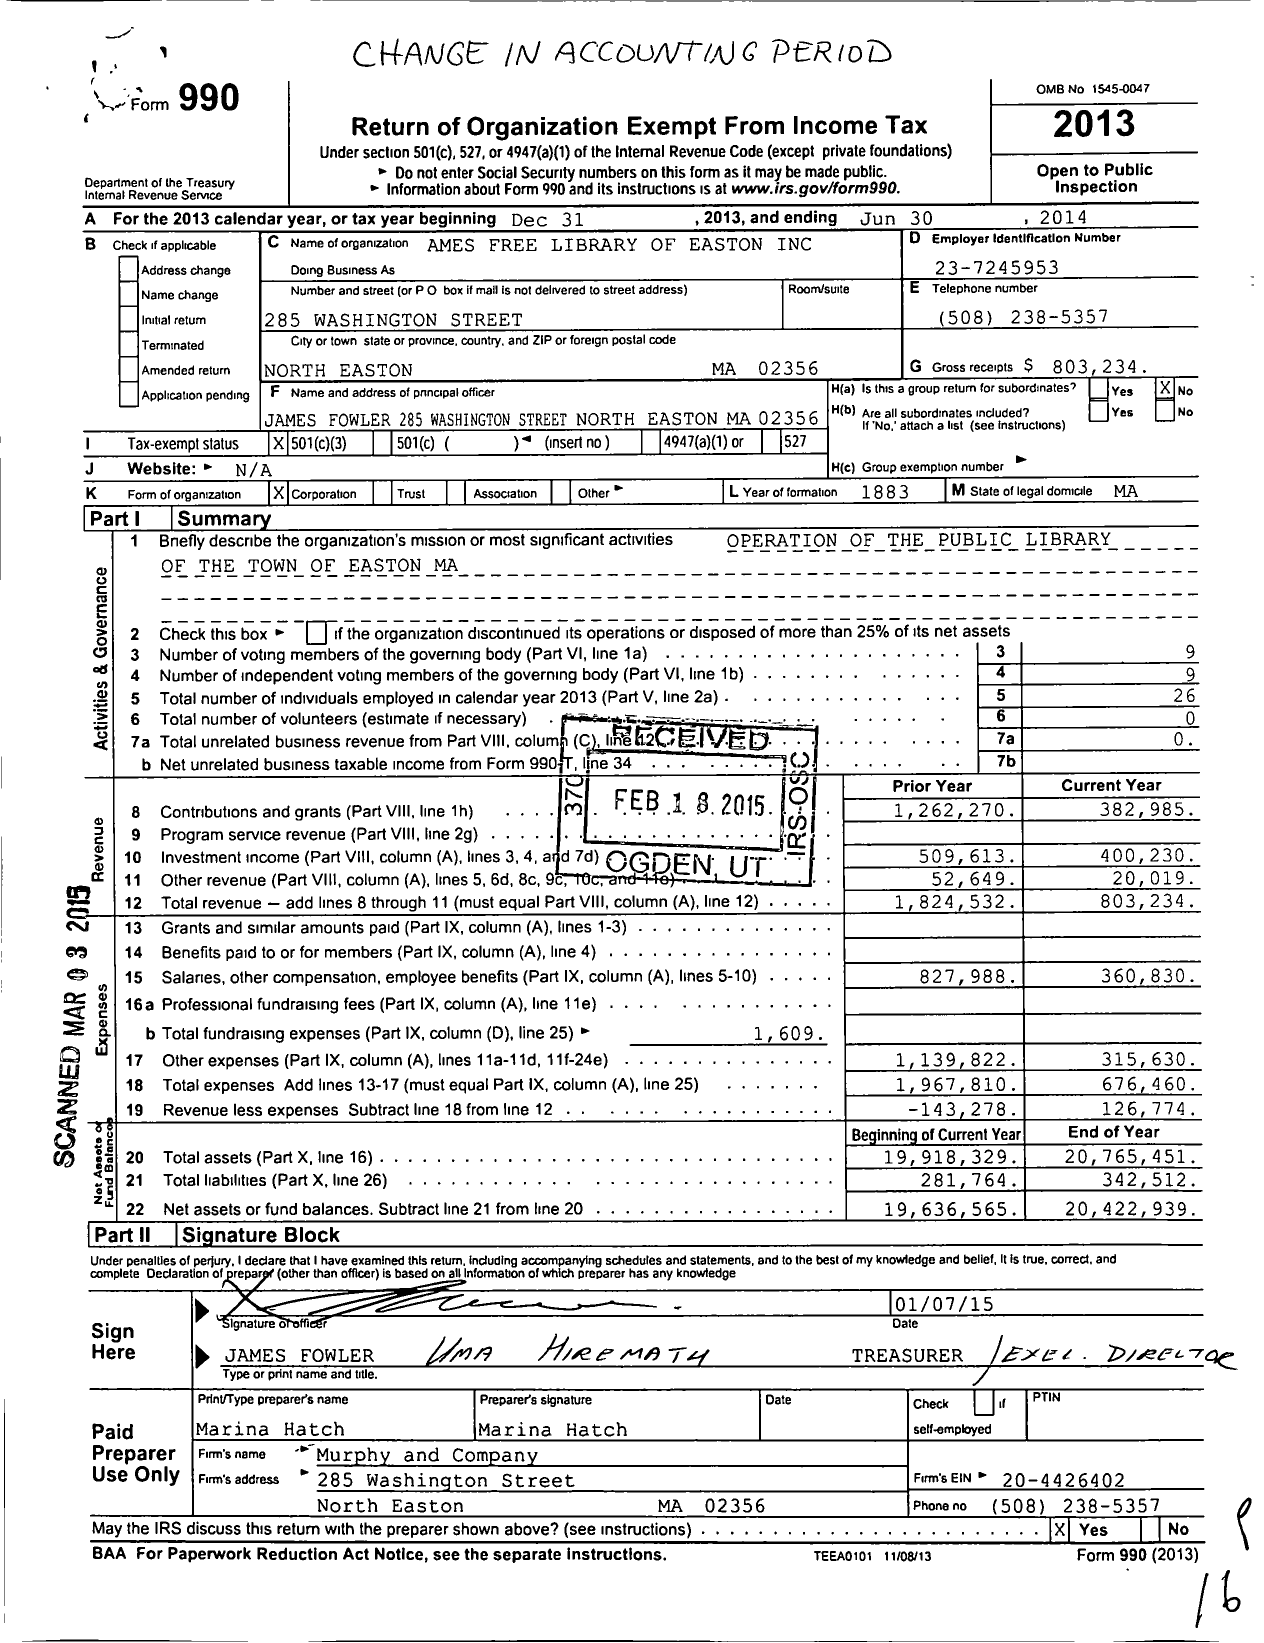 Image of first page of 2013 Form 990 for Ames Free Library of Easton